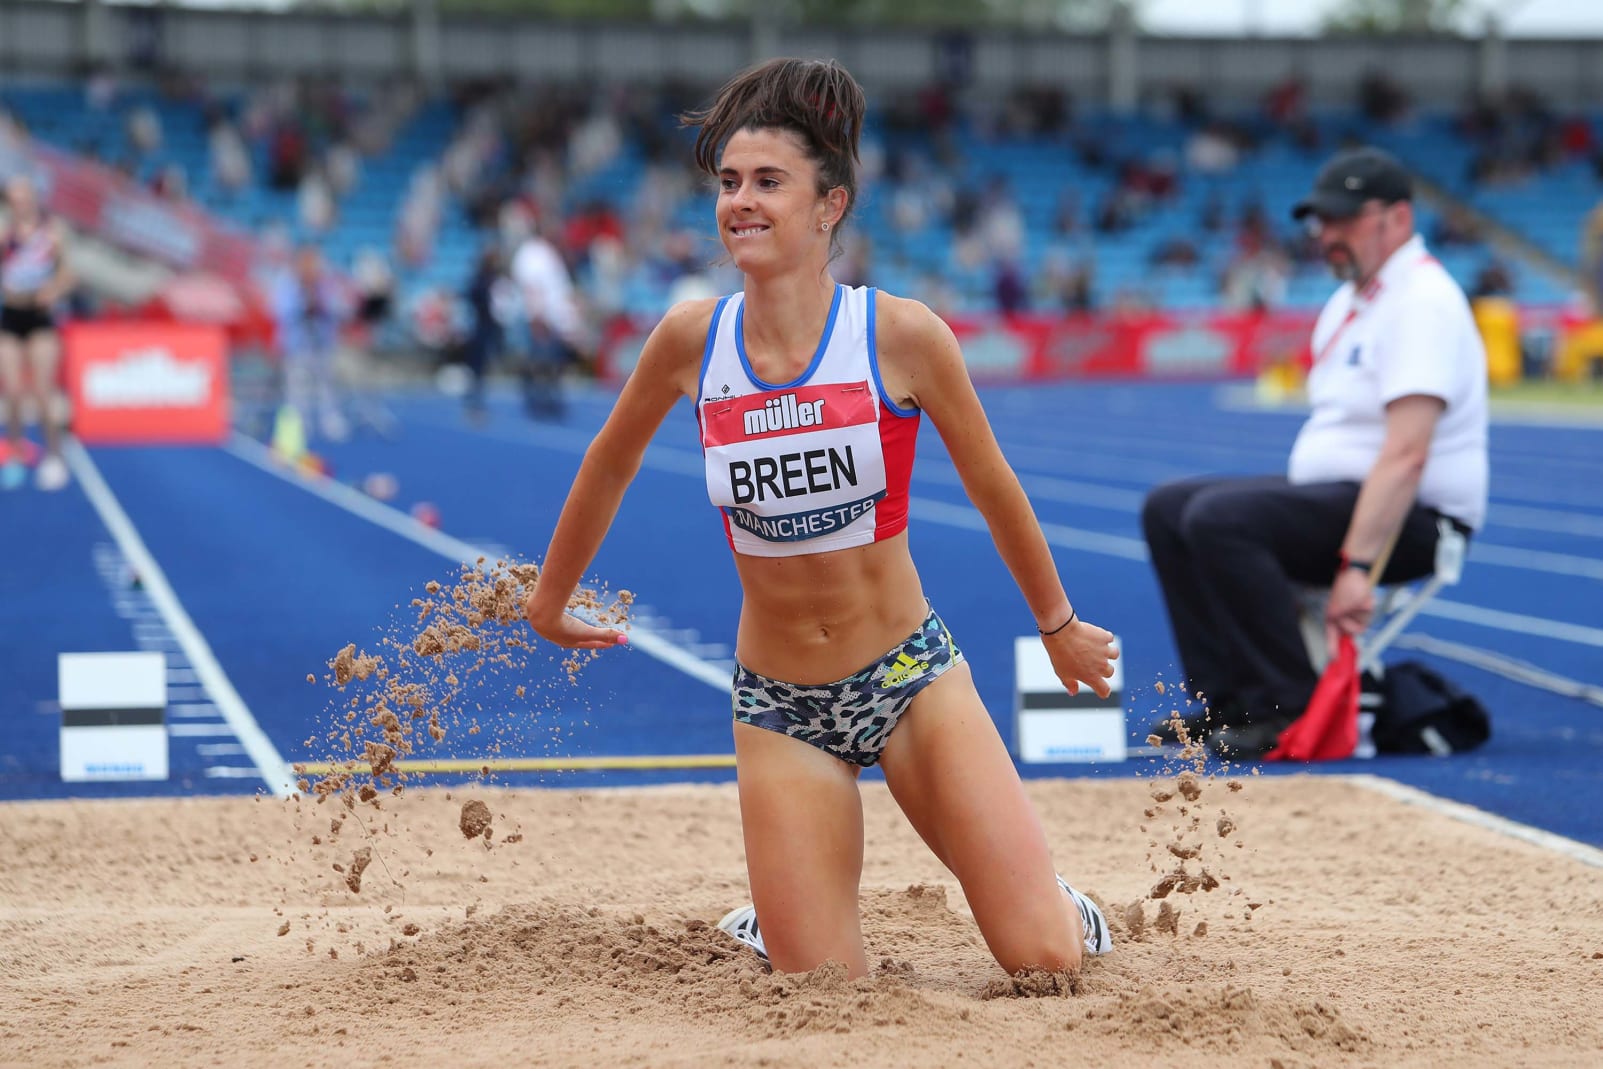 Olivia Breen said this month she was left "speechless" when an official at the English Championships told her that her sprint briefs were "too short and inappropriate."